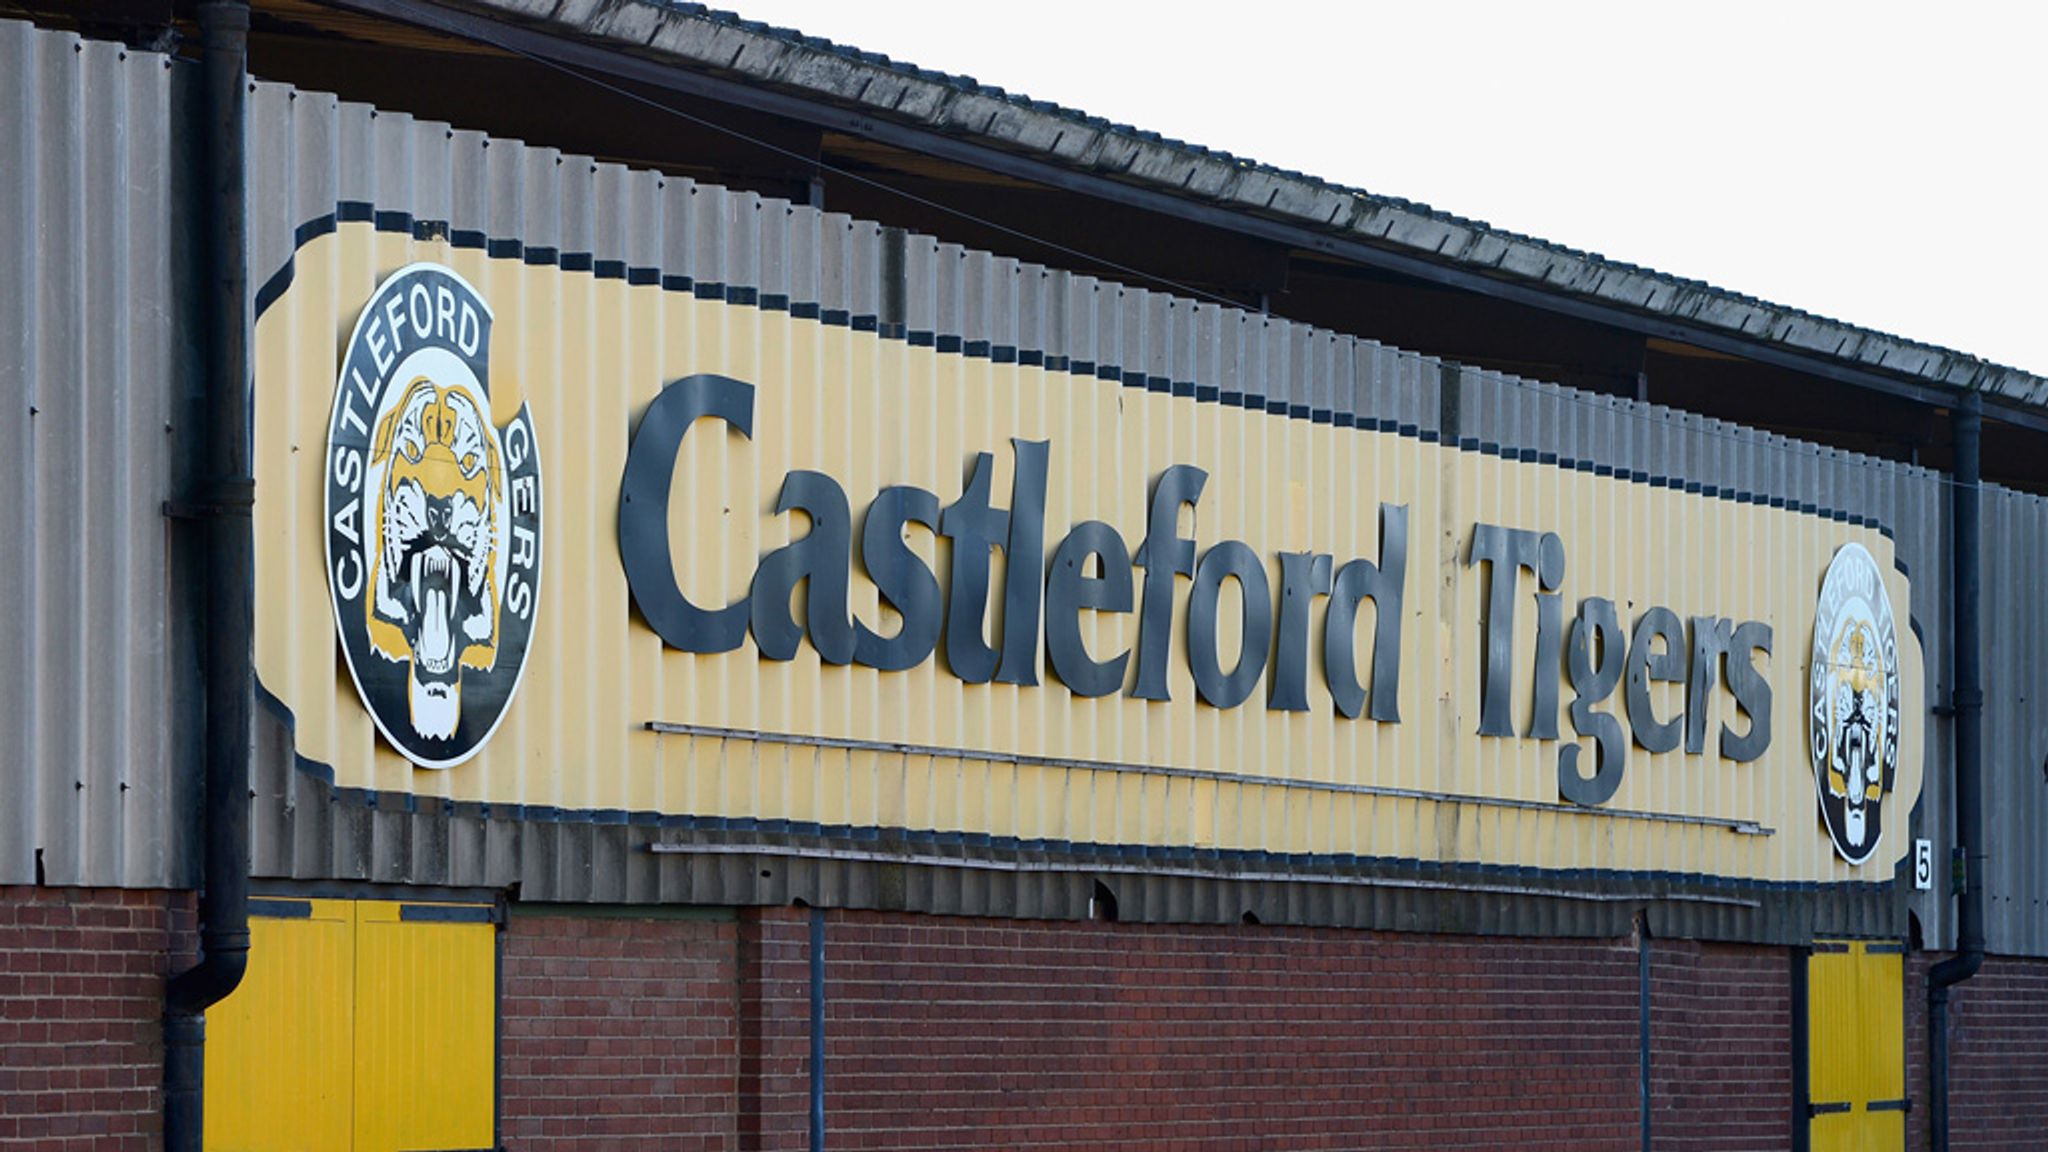 Castleford Tigers' Wheldon Road developers respond after Environmental  Agency objection - YorkshireLive